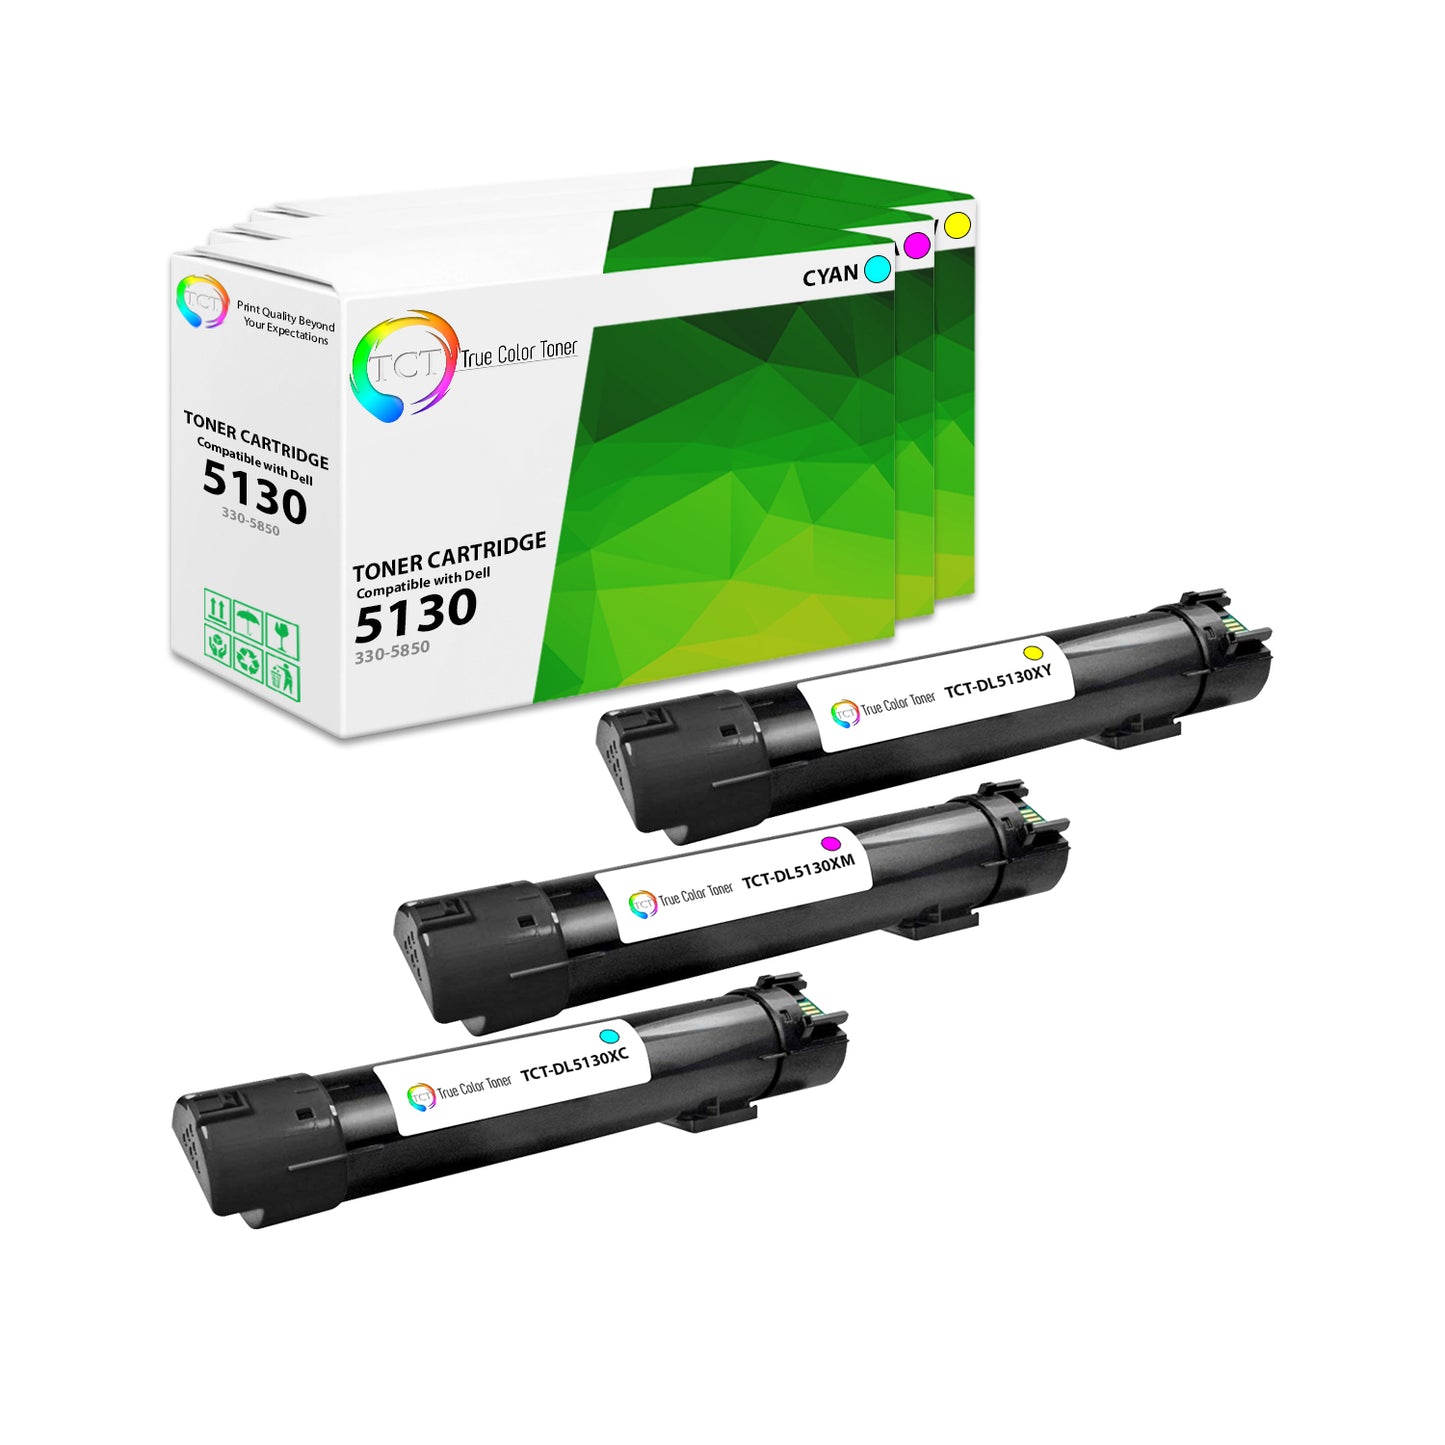 TCT Compatible High Yield Toner Cartridge Replacement for the Dell 5130 Series - 3 Pack (C, M, Y)